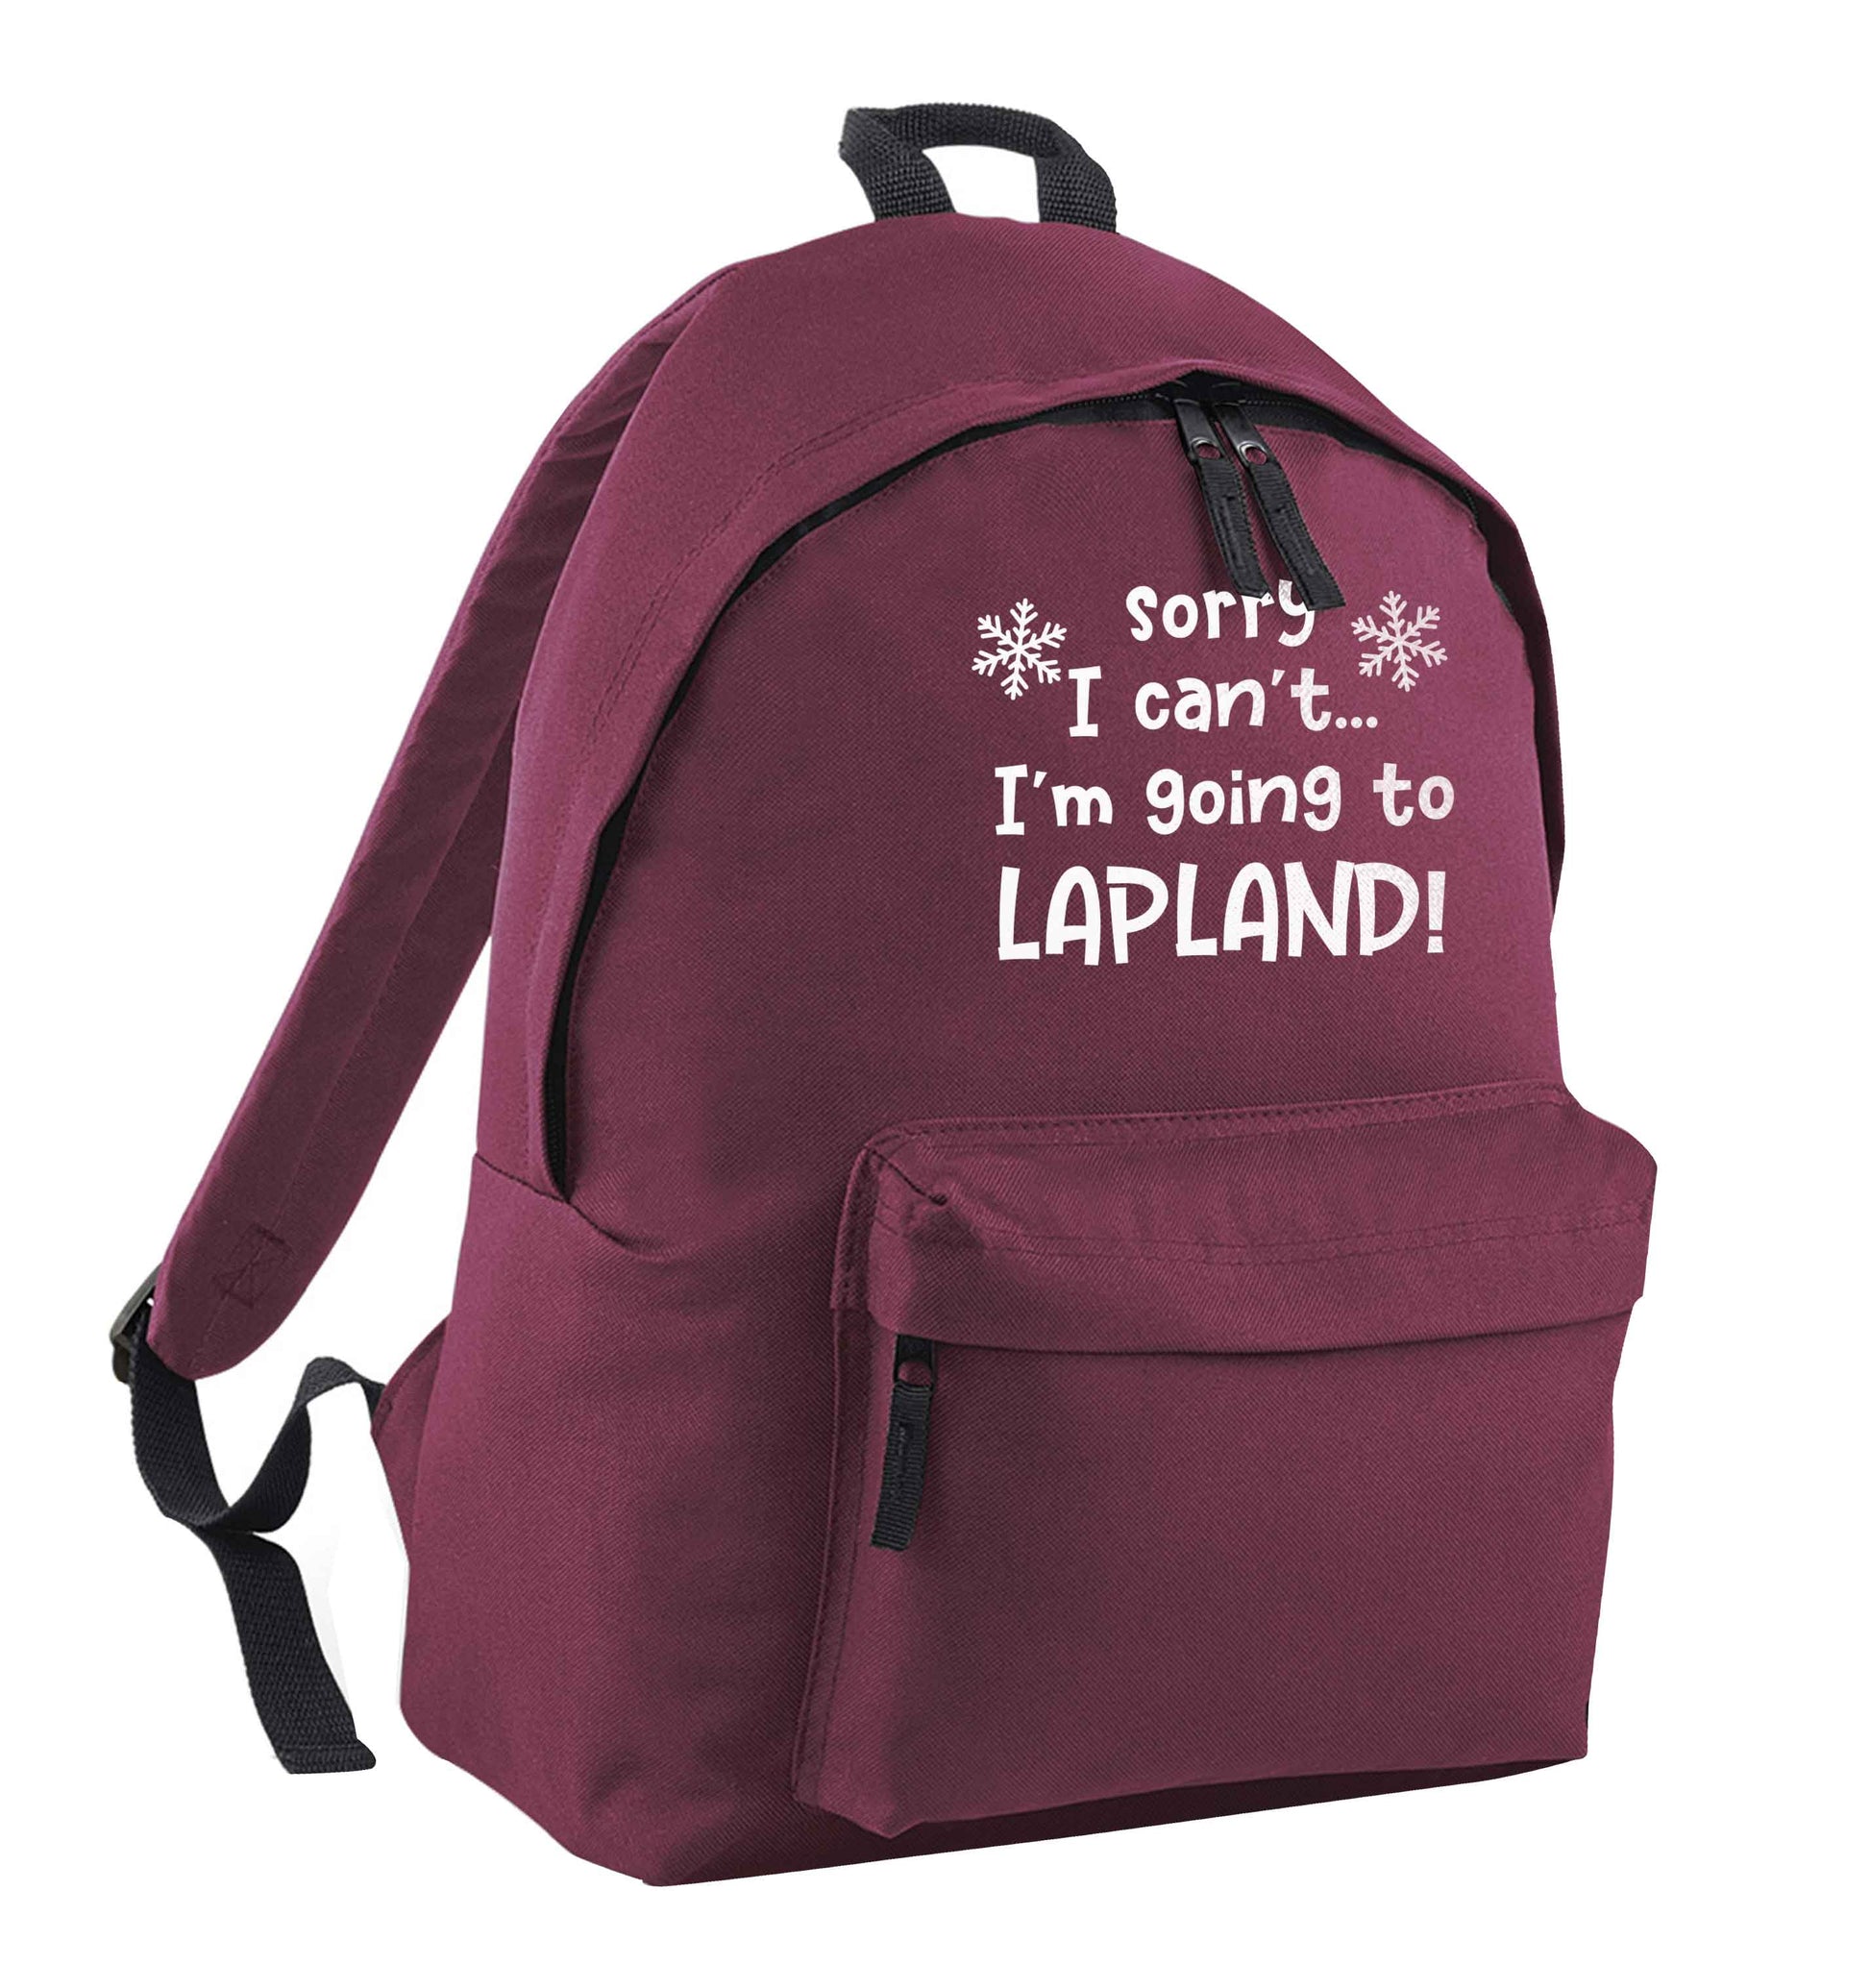 Sorry I can't I'm going to Lapland maroon children's backpack